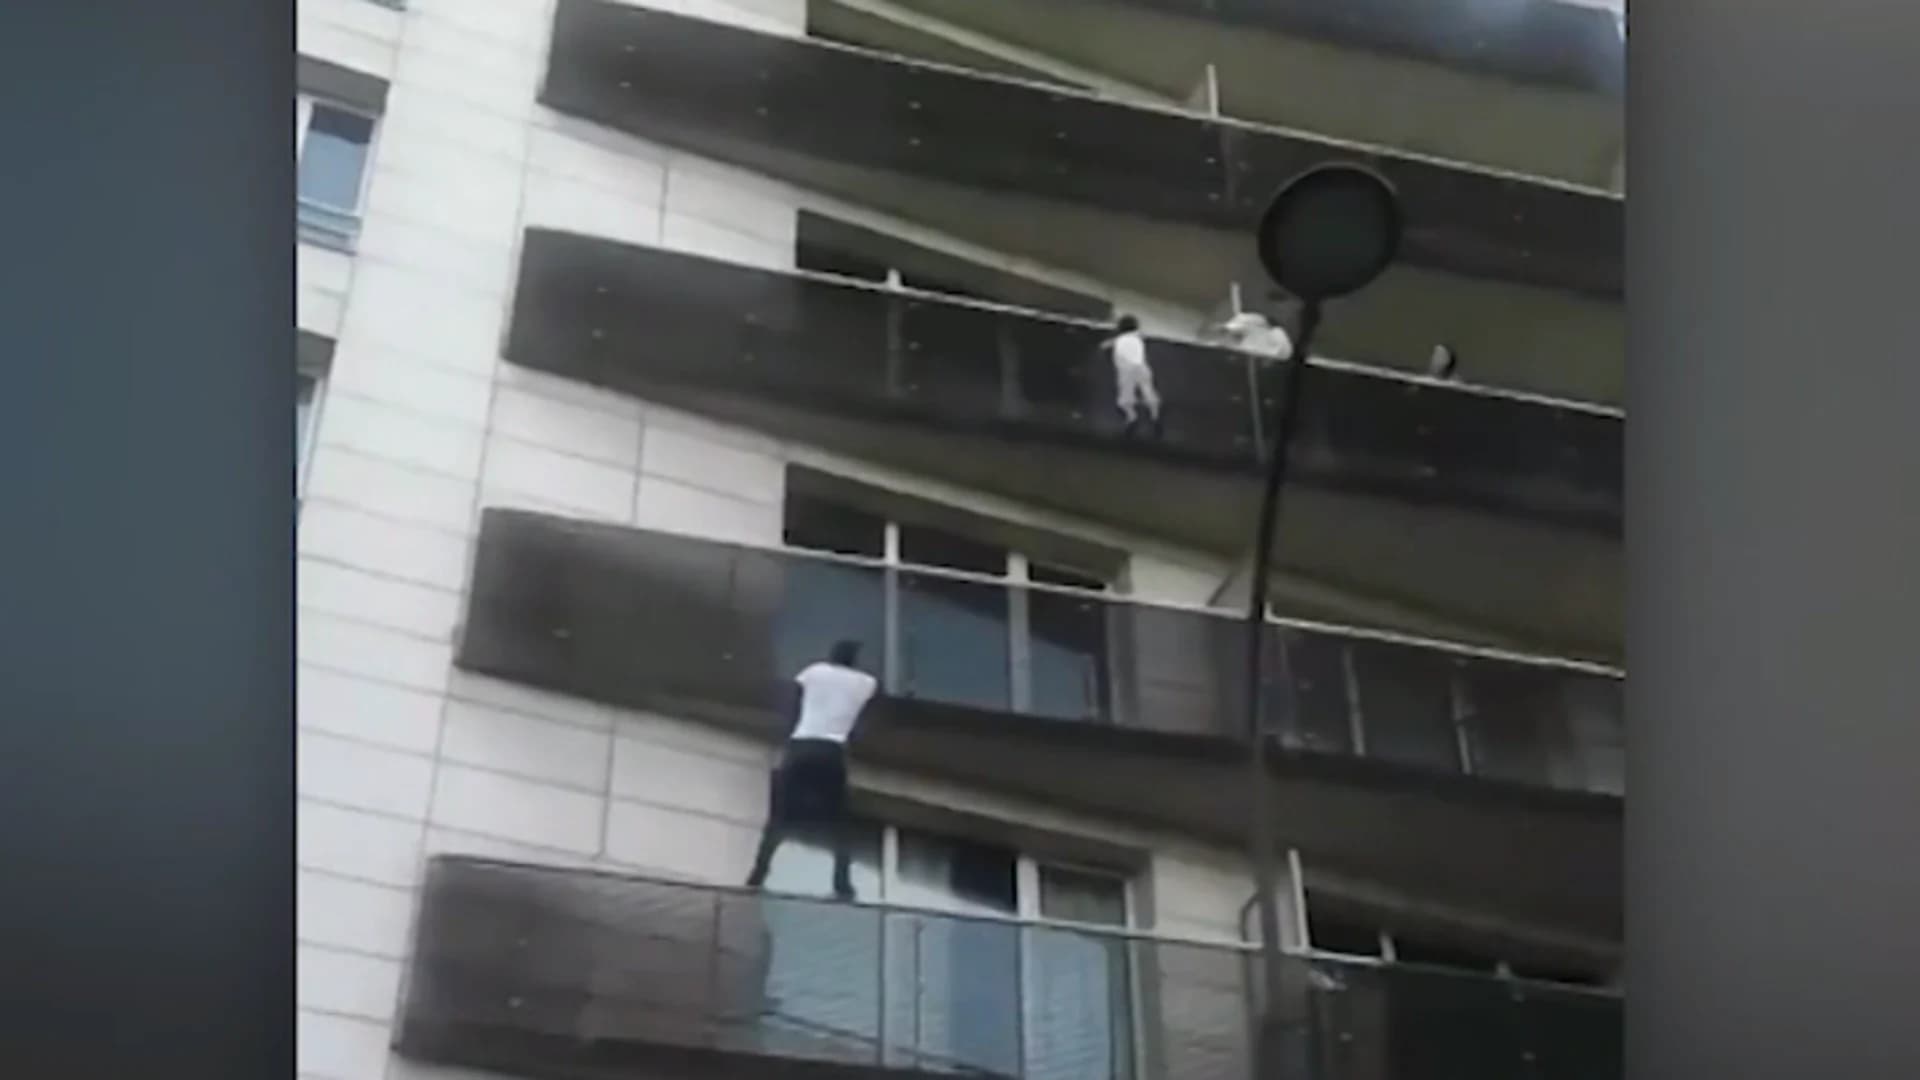 #N12BX: Man scales building to save dangling child